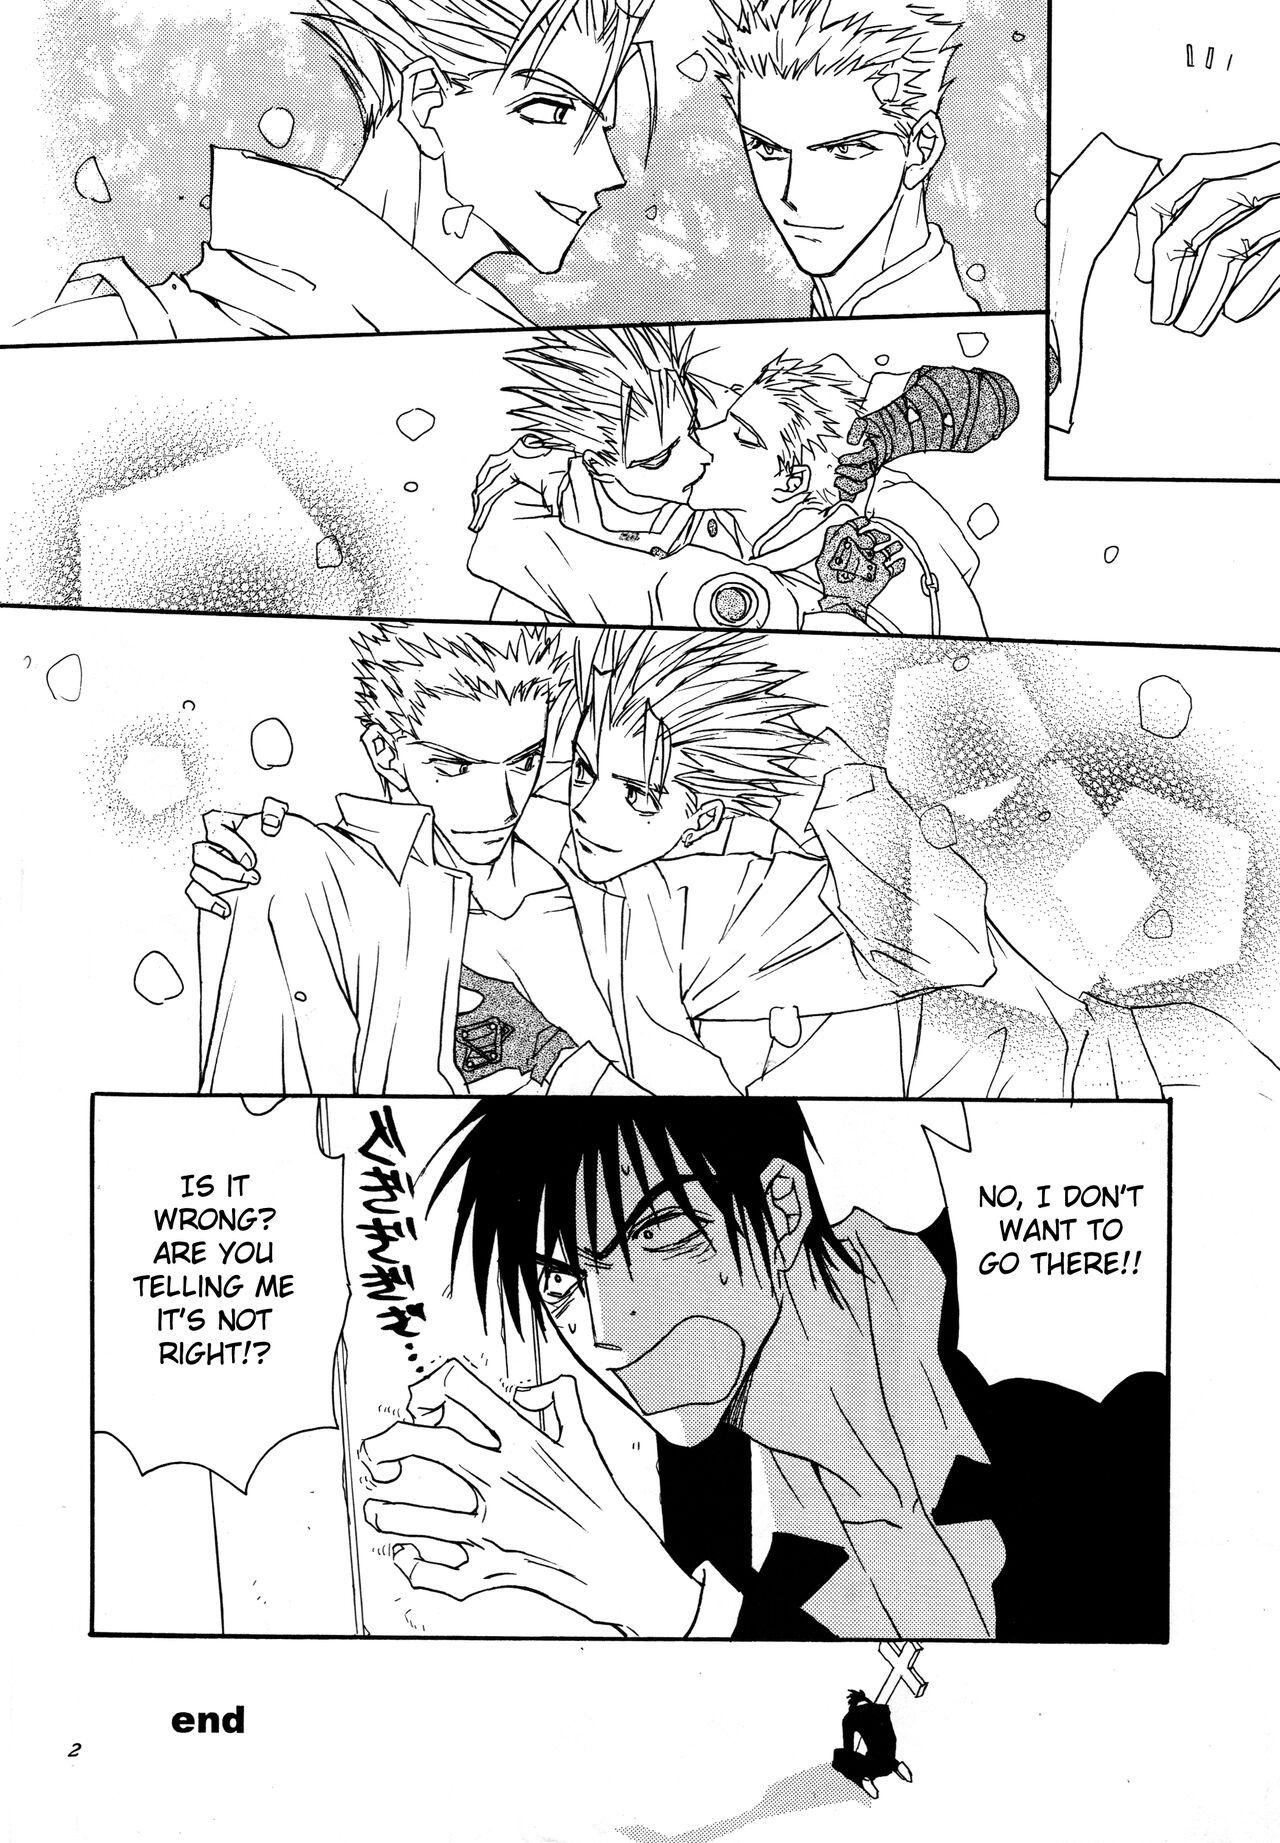 Butthole Crazy Diamond - Trigun Spooning - Page 3